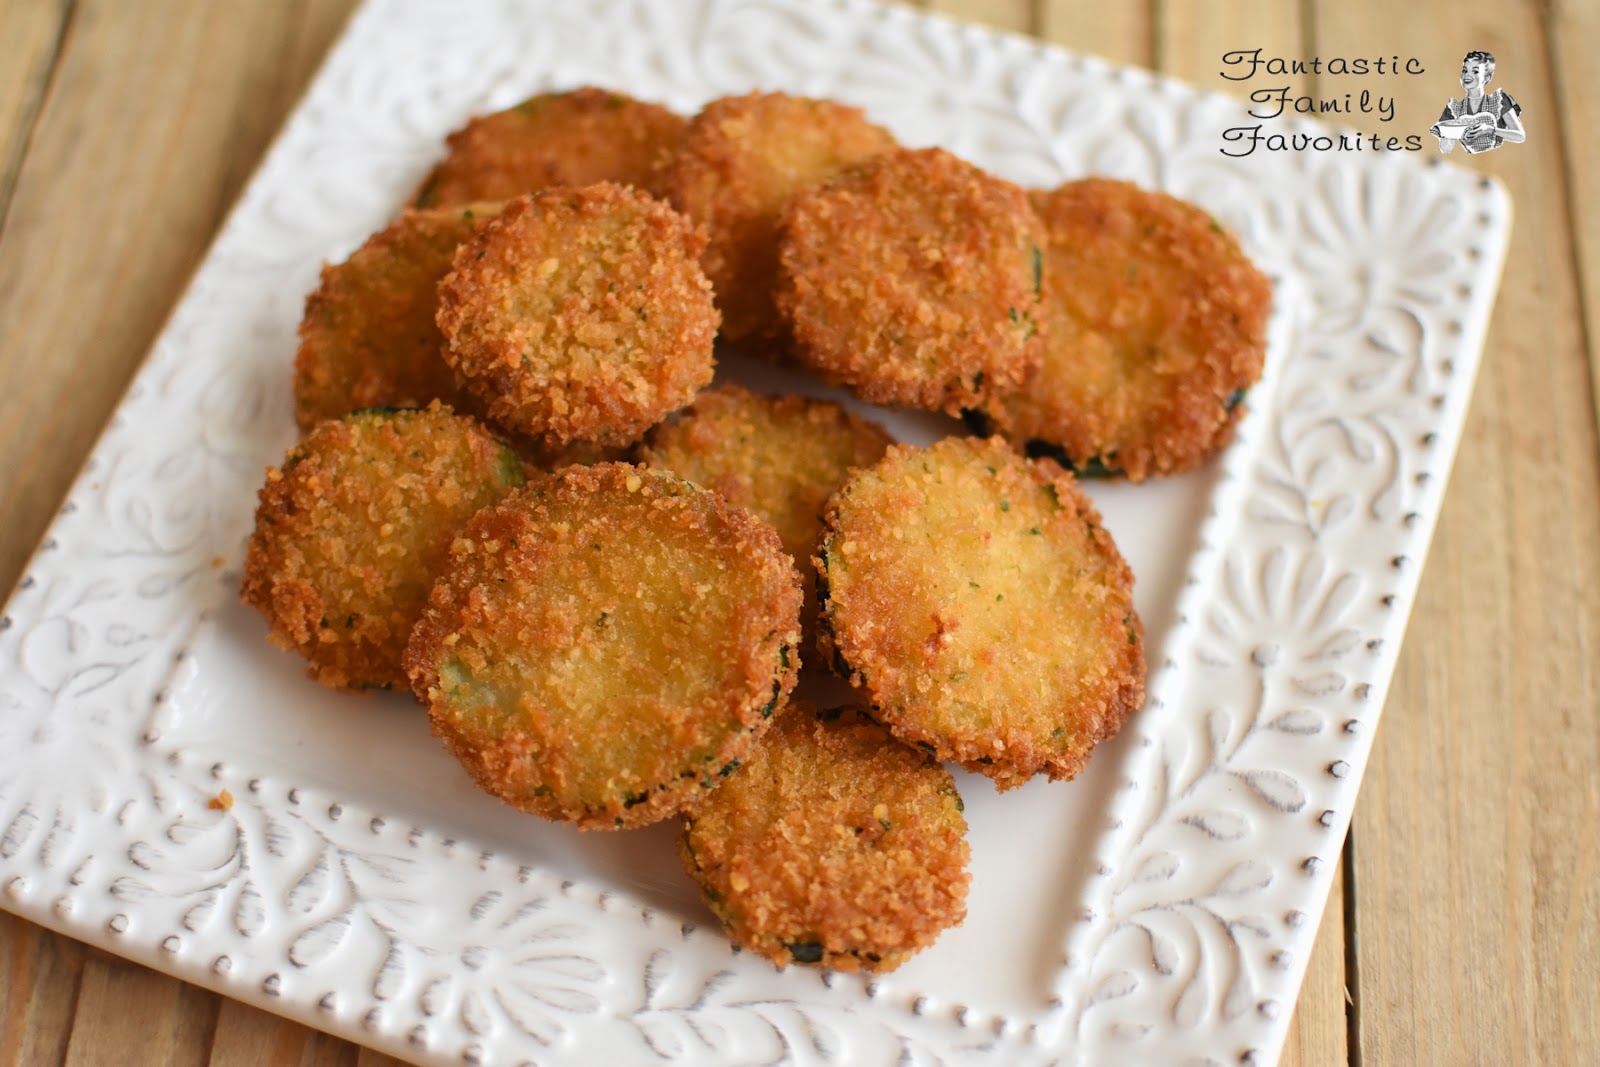 Fantastic Family Favorites: Fried Zucchini